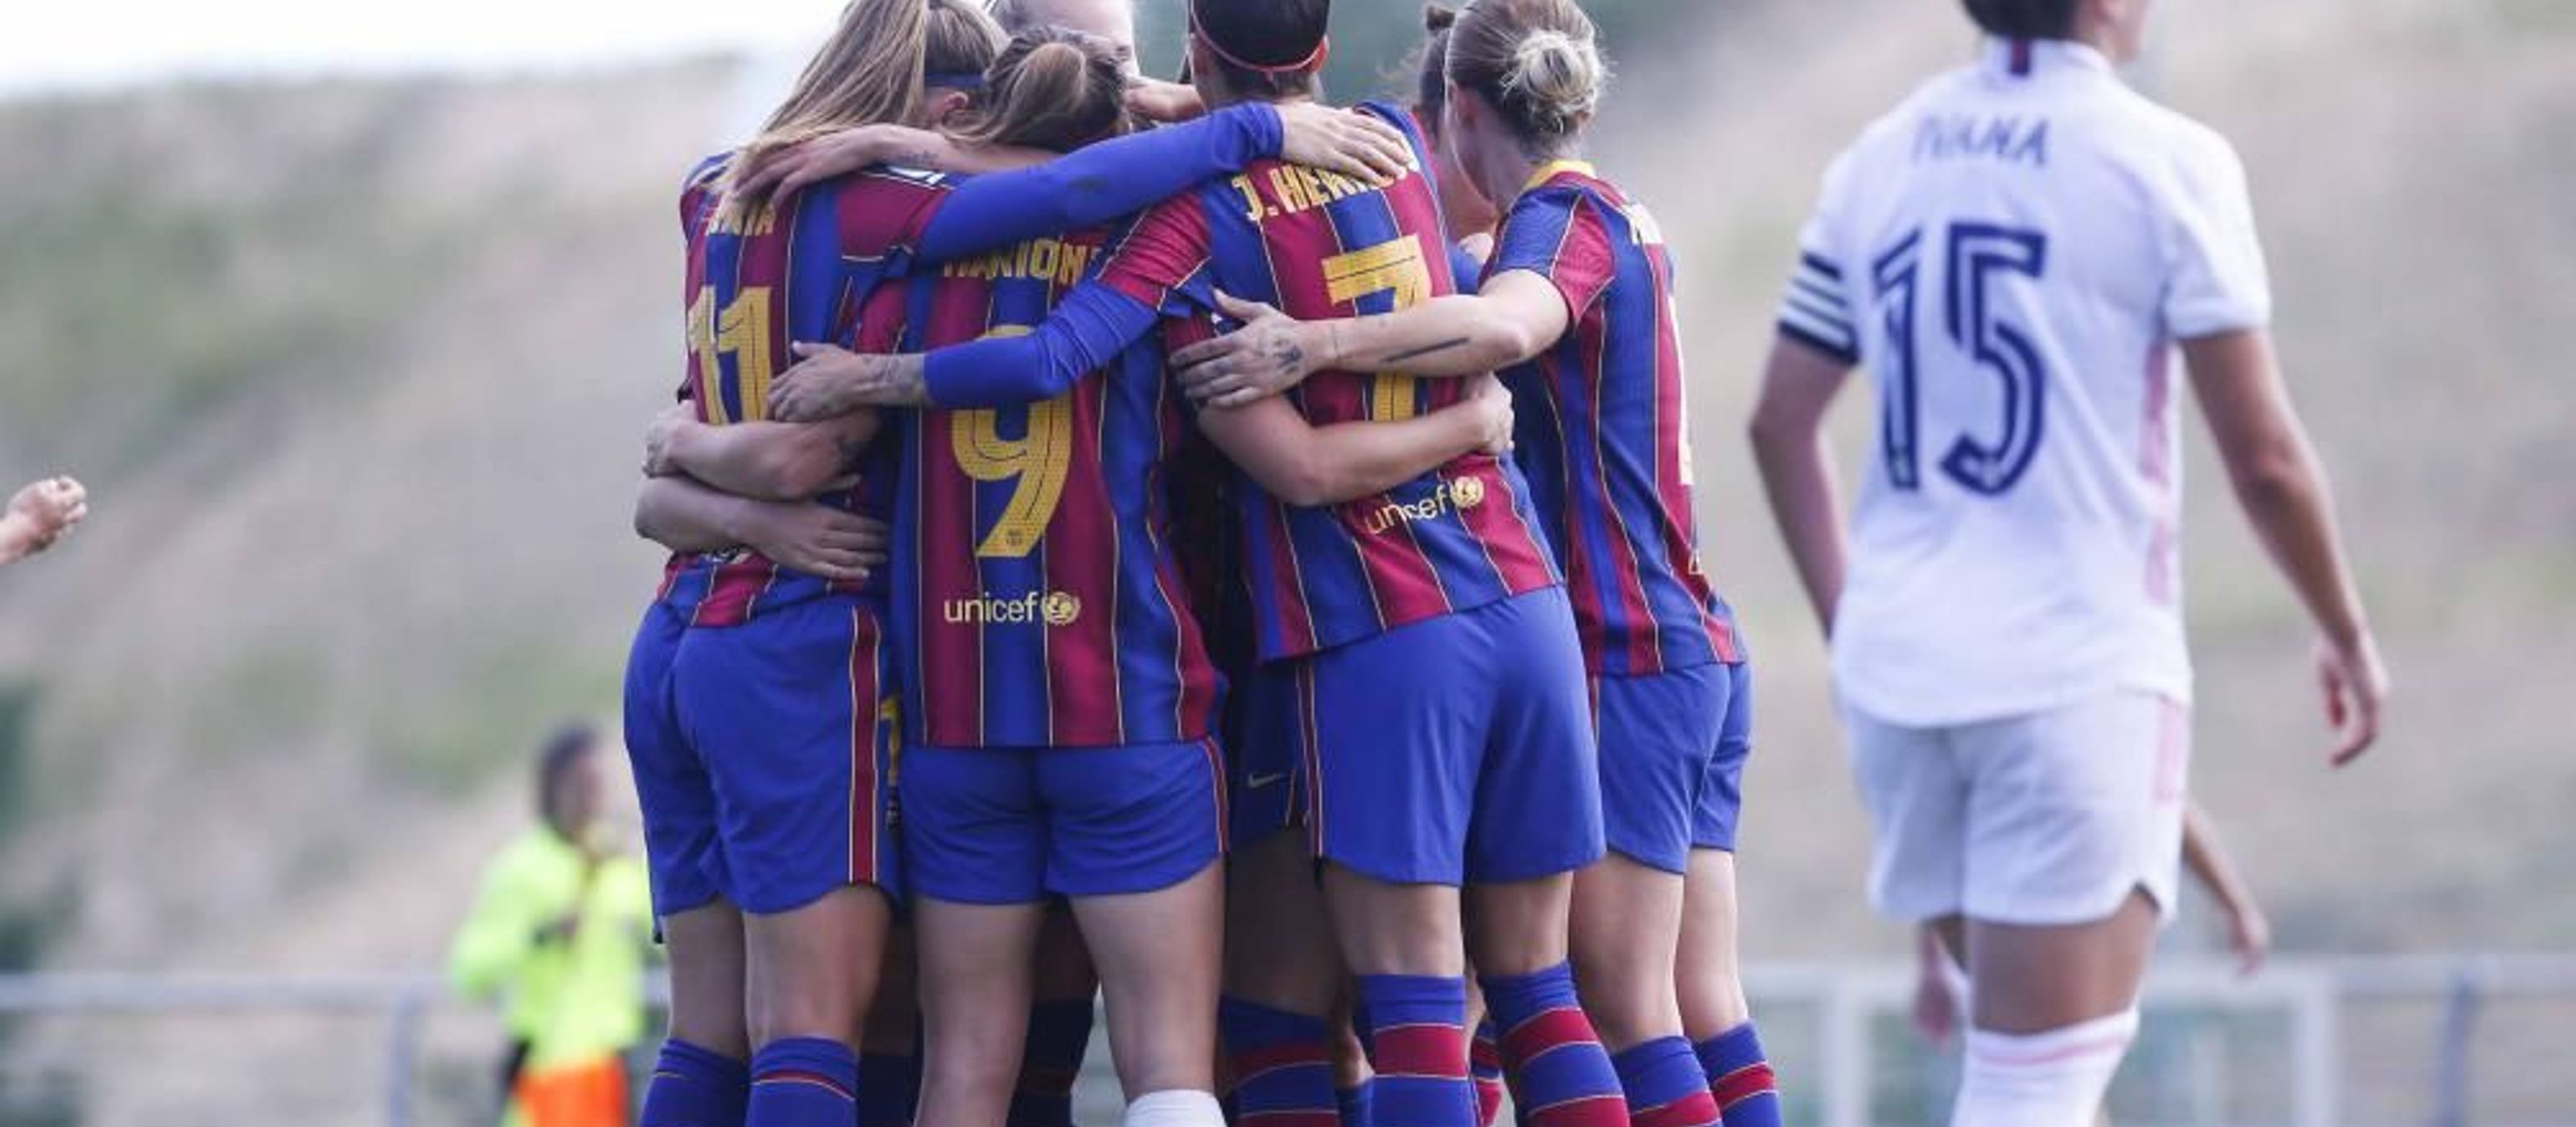 FC Barça Femení players celebrate during the first women's 'clásico' against Real Madrid (image courtesy of FCBarcelona.com)